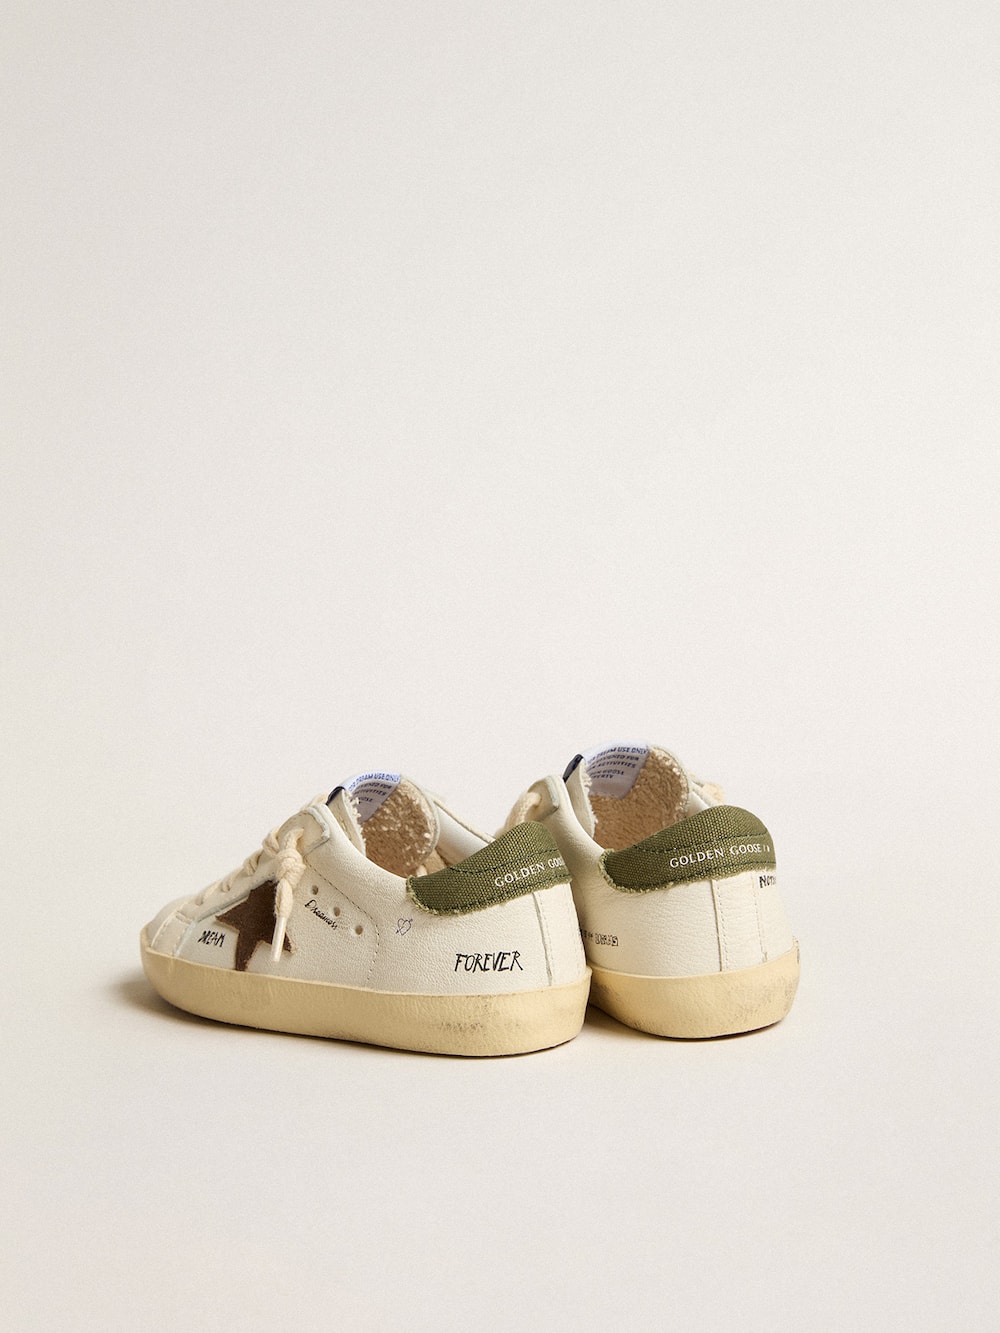 Golden Goose - Super-Star Junior in nappa with suede star and green heel tab in 